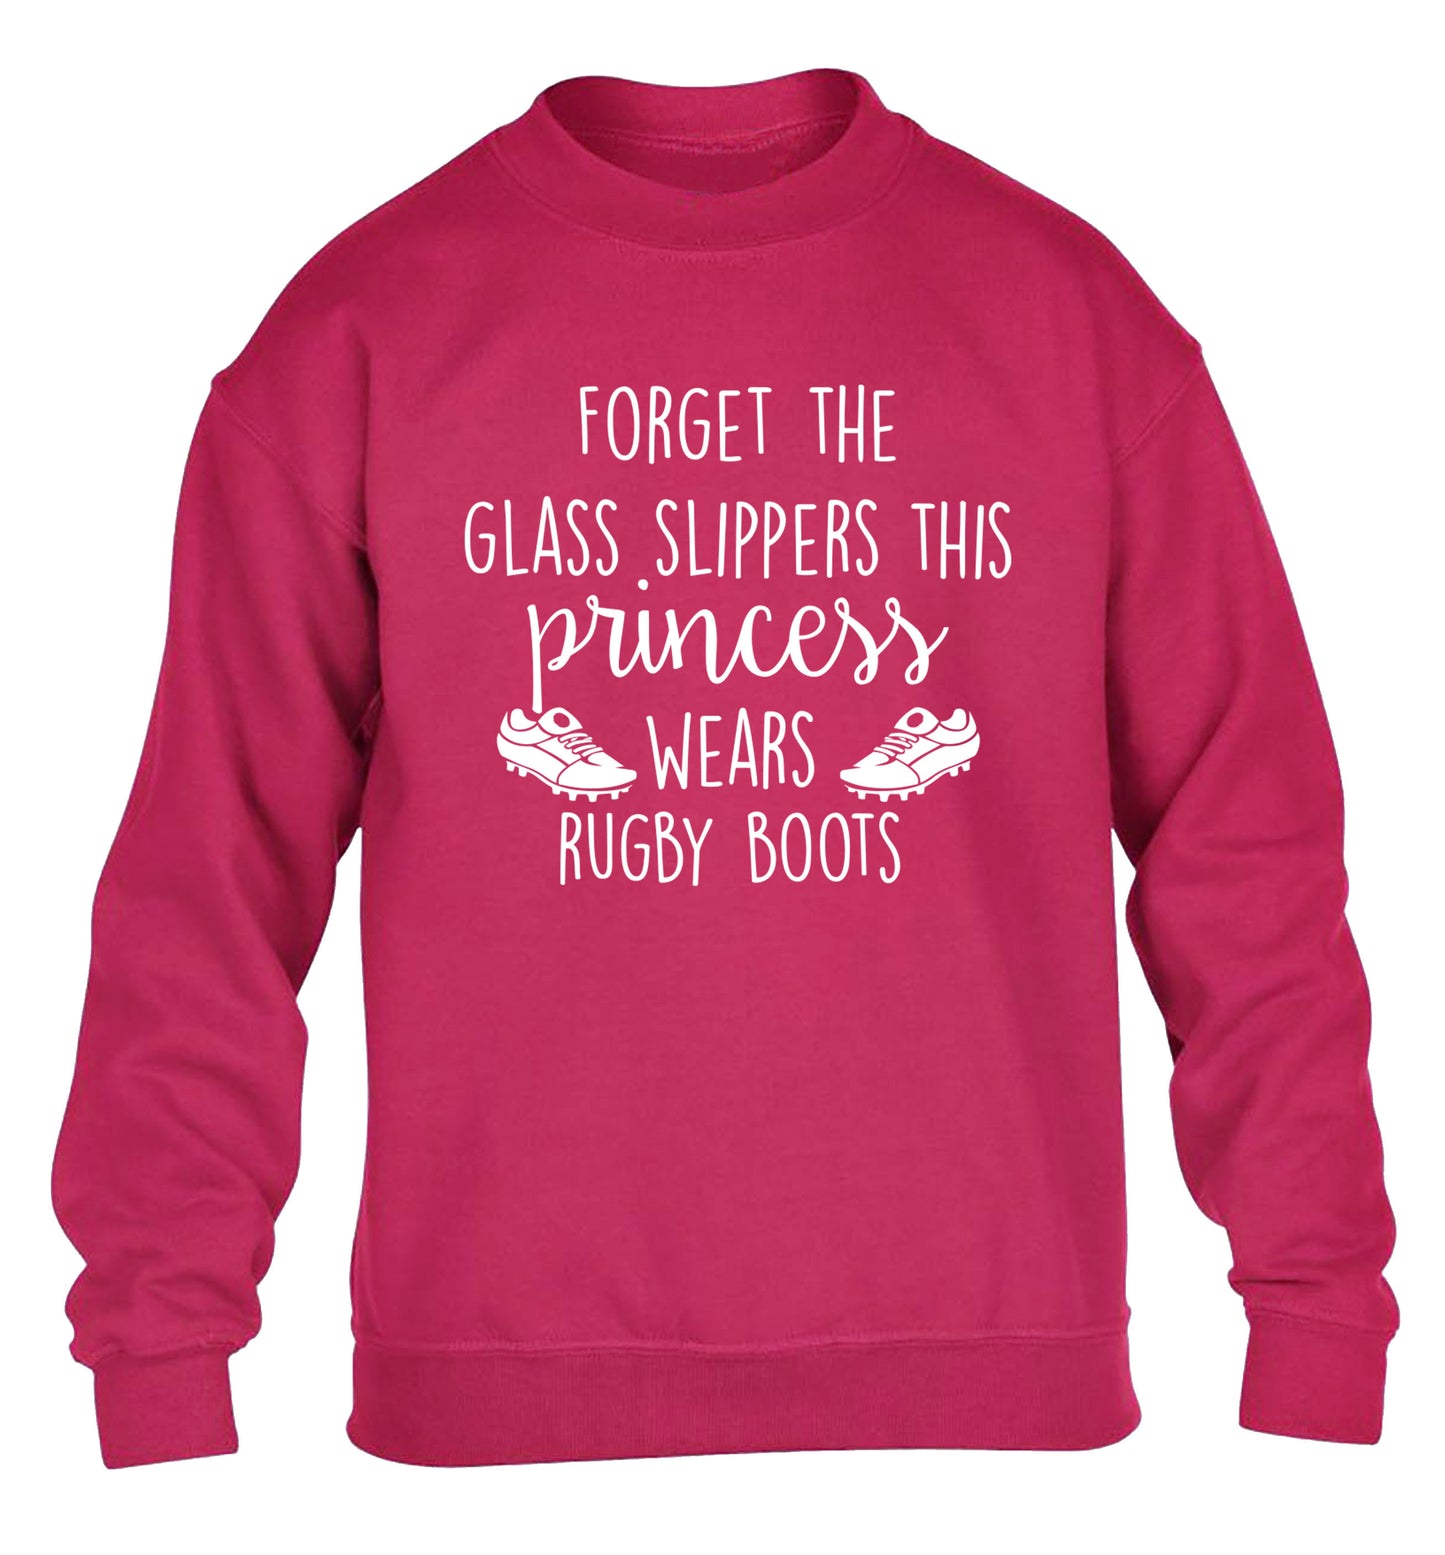 Forget the glass slippers this princess wears rugby boots children's pink sweater 12-14 Years